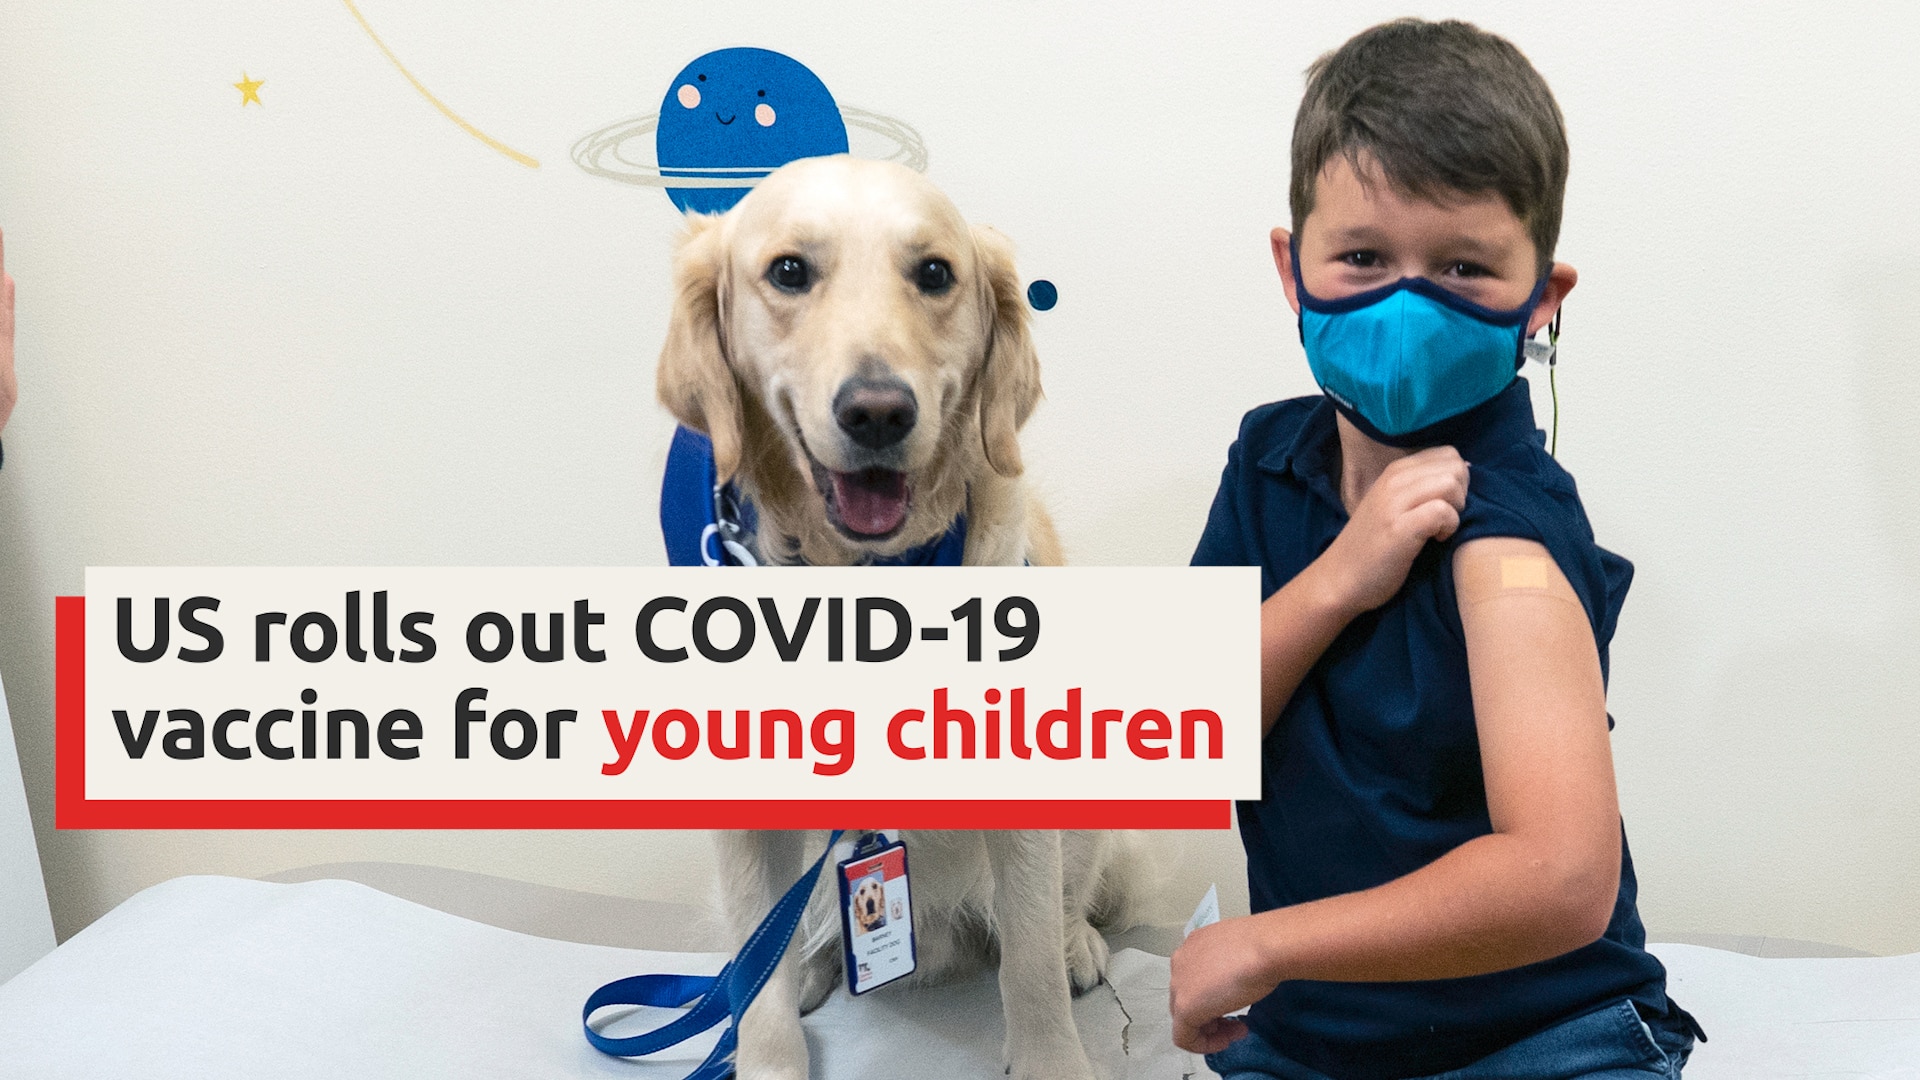 US rolls out COVID-19 vaccine for young children